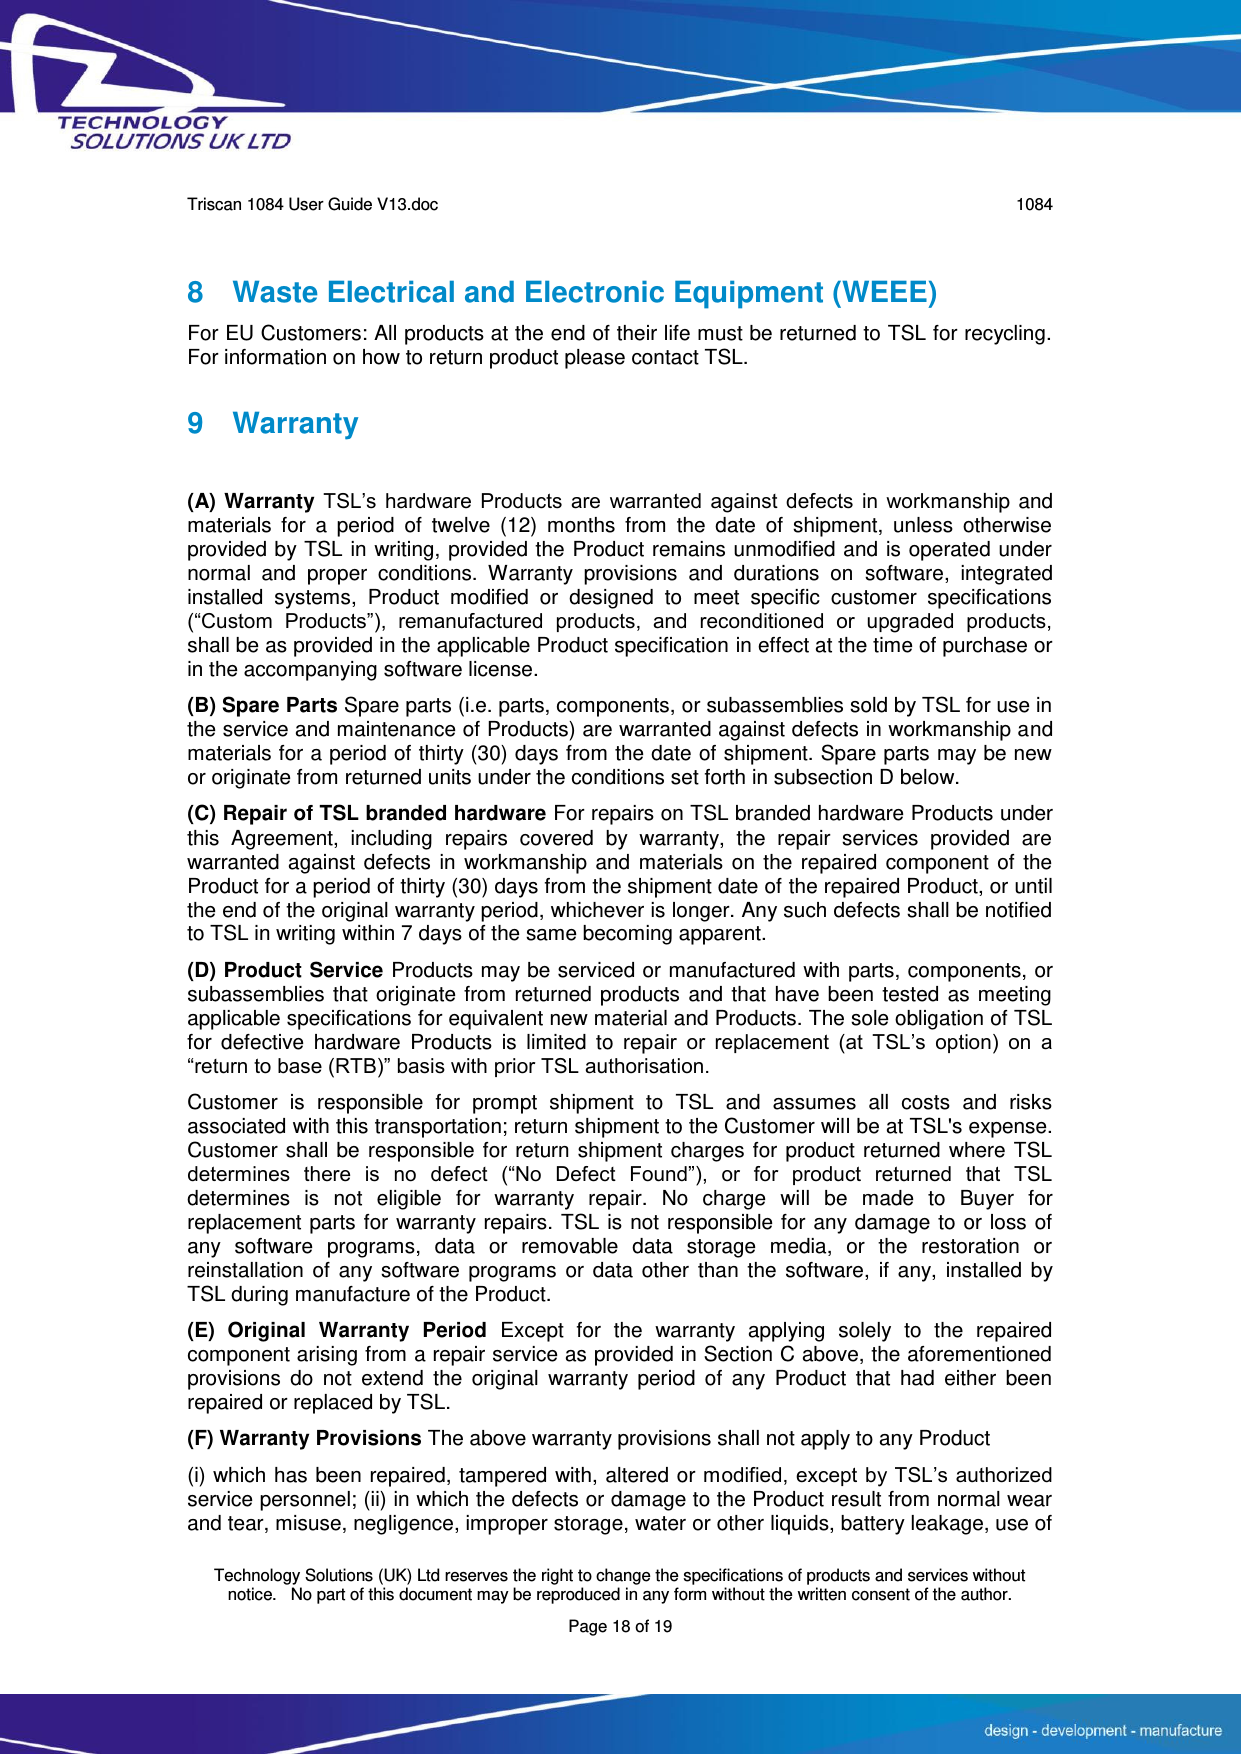      Triscan 1084 User Guide V13.doc   1084  Technology Solutions (UK) Ltd reserves the right to change the specifications of products and services without notice.   No part of this document may be reproduced in any form without the written consent of the author. Page 18 of 19 8  Waste Electrical and Electronic Equipment (WEEE) For EU Customers: All products at the end of their life must be returned to TSL for recycling. For information on how to return product please contact TSL. 9  Warranty  (A) Warranty TSL’s  hardware  Products  are  warranted  against  defects  in  workmanship and materials  for  a  period  of  twelve  (12)  months  from  the  date  of  shipment,  unless  otherwise provided by TSL in writing, provided the Product remains unmodified and is operated under normal  and  proper  conditions.  Warranty  provisions  and  durations  on  software,  integrated installed  systems,  Product  modified  or  designed  to  meet  specific  customer  specifications (“Custom  Products”),  remanufactured  products,  and  reconditioned  or  upgraded  products, shall be as provided in the applicable Product specification in effect at the time of purchase or in the accompanying software license. (B) Spare Parts Spare parts (i.e. parts, components, or subassemblies sold by TSL for use in the service and maintenance of Products) are warranted against defects in workmanship and materials for a period of thirty (30) days from the date of shipment. Spare parts may be new or originate from returned units under the conditions set forth in subsection D below. (C) Repair of TSL branded hardware For repairs on TSL branded hardware Products under this  Agreement,  including  repairs  covered  by  warranty,  the  repair  services  provided  are warranted against defects in workmanship and materials on the repaired component of the Product for a period of thirty (30) days from the shipment date of the repaired Product, or until the end of the original warranty period, whichever is longer. Any such defects shall be notified to TSL in writing within 7 days of the same becoming apparent. (D) Product Service Products may be serviced or manufactured with parts, components, or subassemblies that originate from returned products and that have been tested as meeting applicable specifications for equivalent new material and Products. The sole obligation of TSL for  defective  hardware  Products  is  limited  to  repair  or  replacement  (at  TSL’s  option)  on  a “return to base (RTB)” basis with prior TSL authorisation. Customer  is  responsible  for  prompt  shipment  to  TSL  and  assumes  all  costs  and  risks associated with this transportation; return shipment to the Customer will be at TSL&apos;s expense. Customer shall be responsible for return shipment charges for product returned where TSL determines  there  is  no  defect  (“No  Defect  Found”),  or  for  product  returned  that  TSL determines  is  not  eligible  for  warranty  repair.  No  charge  will  be  made  to  Buyer  for replacement parts for warranty repairs. TSL is not responsible for any damage to or loss of any  software  programs,  data  or  removable  data  storage  media,  or  the  restoration  or reinstallation of  any software  programs or  data other  than  the  software,  if  any, installed by TSL during manufacture of the Product. (E)  Original  Warranty  Period  Except  for  the  warranty  applying  solely  to  the  repaired component arising from a repair service as provided in Section C above, the aforementioned provisions  do  not  extend  the  original  warranty  period  of  any  Product  that  had  either  been repaired or replaced by TSL. (F) Warranty Provisions The above warranty provisions shall not apply to any Product (i) which has been repaired, tampered with, altered or modified, except by TSL’s authorized service personnel; (ii) in which the defects or damage to the Product result from normal wear and tear, misuse, negligence, improper storage, water or other liquids, battery leakage, use of 